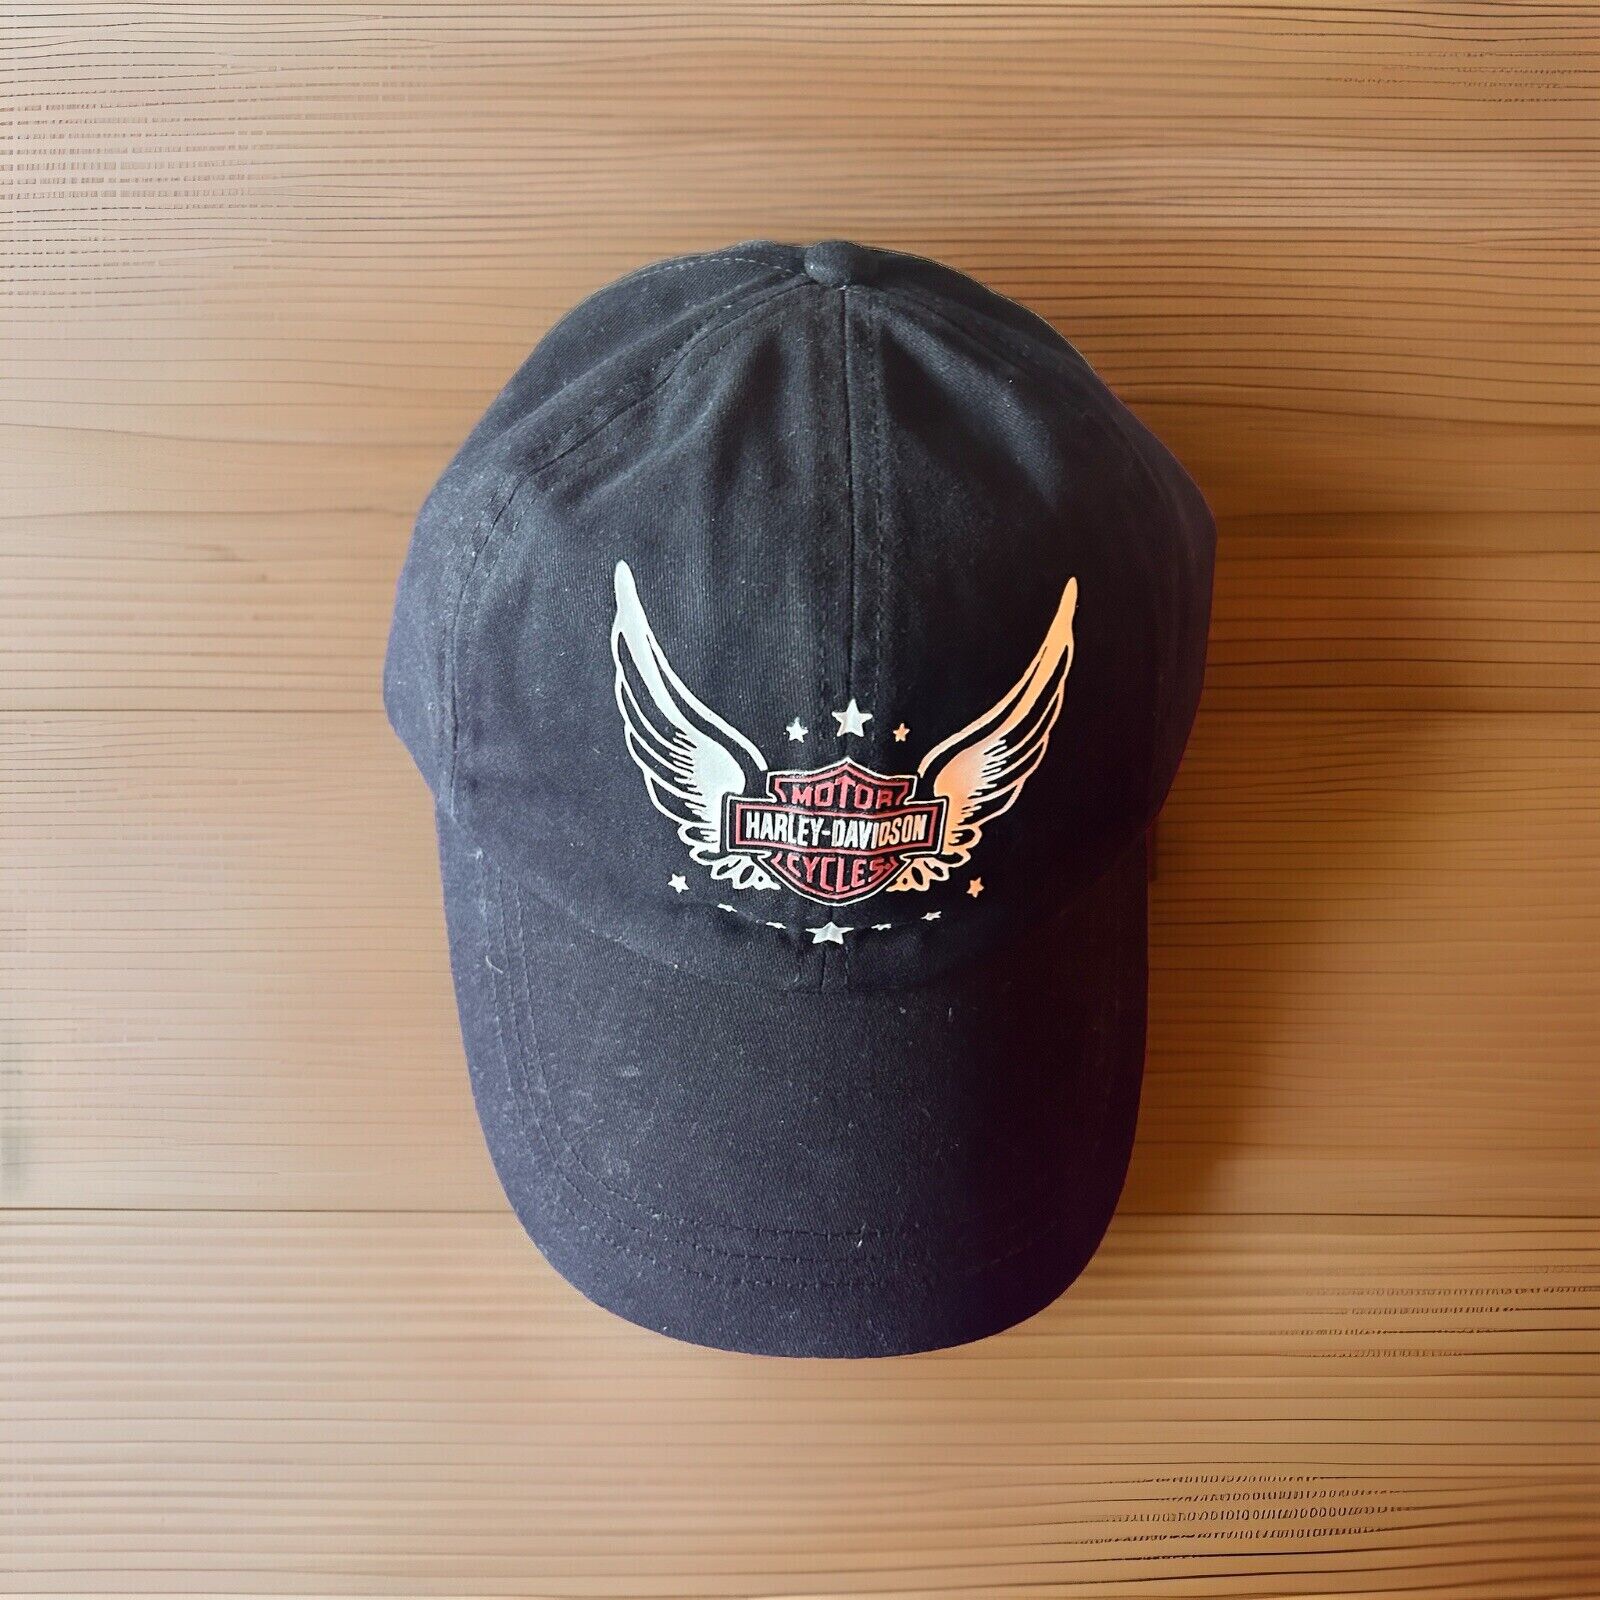 Harley Davidson Wounded Warrior Project Hat Baseball Cap Black One Size.